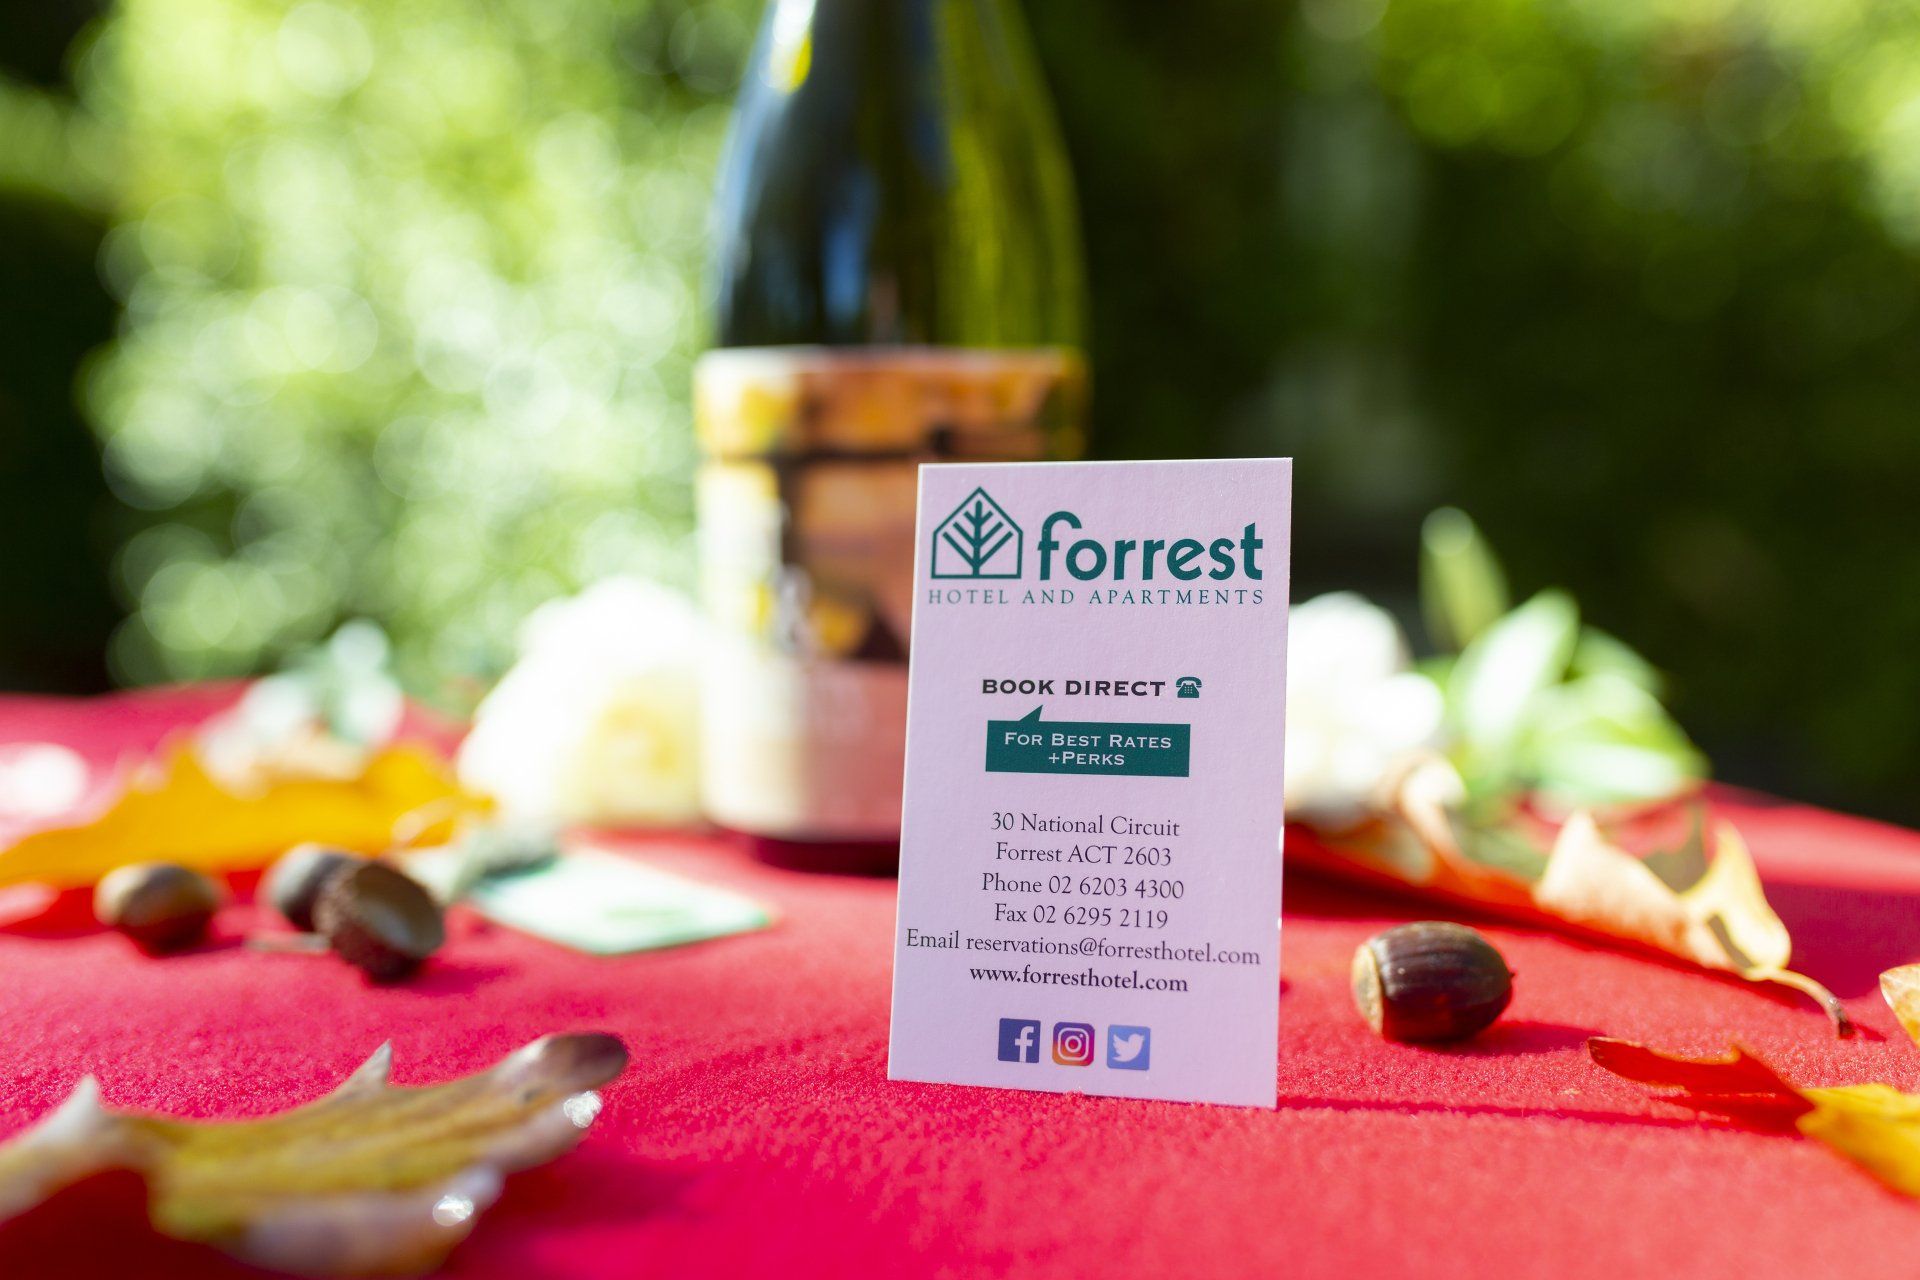 Our Forrest Champagne is a popular choice with the salmon.